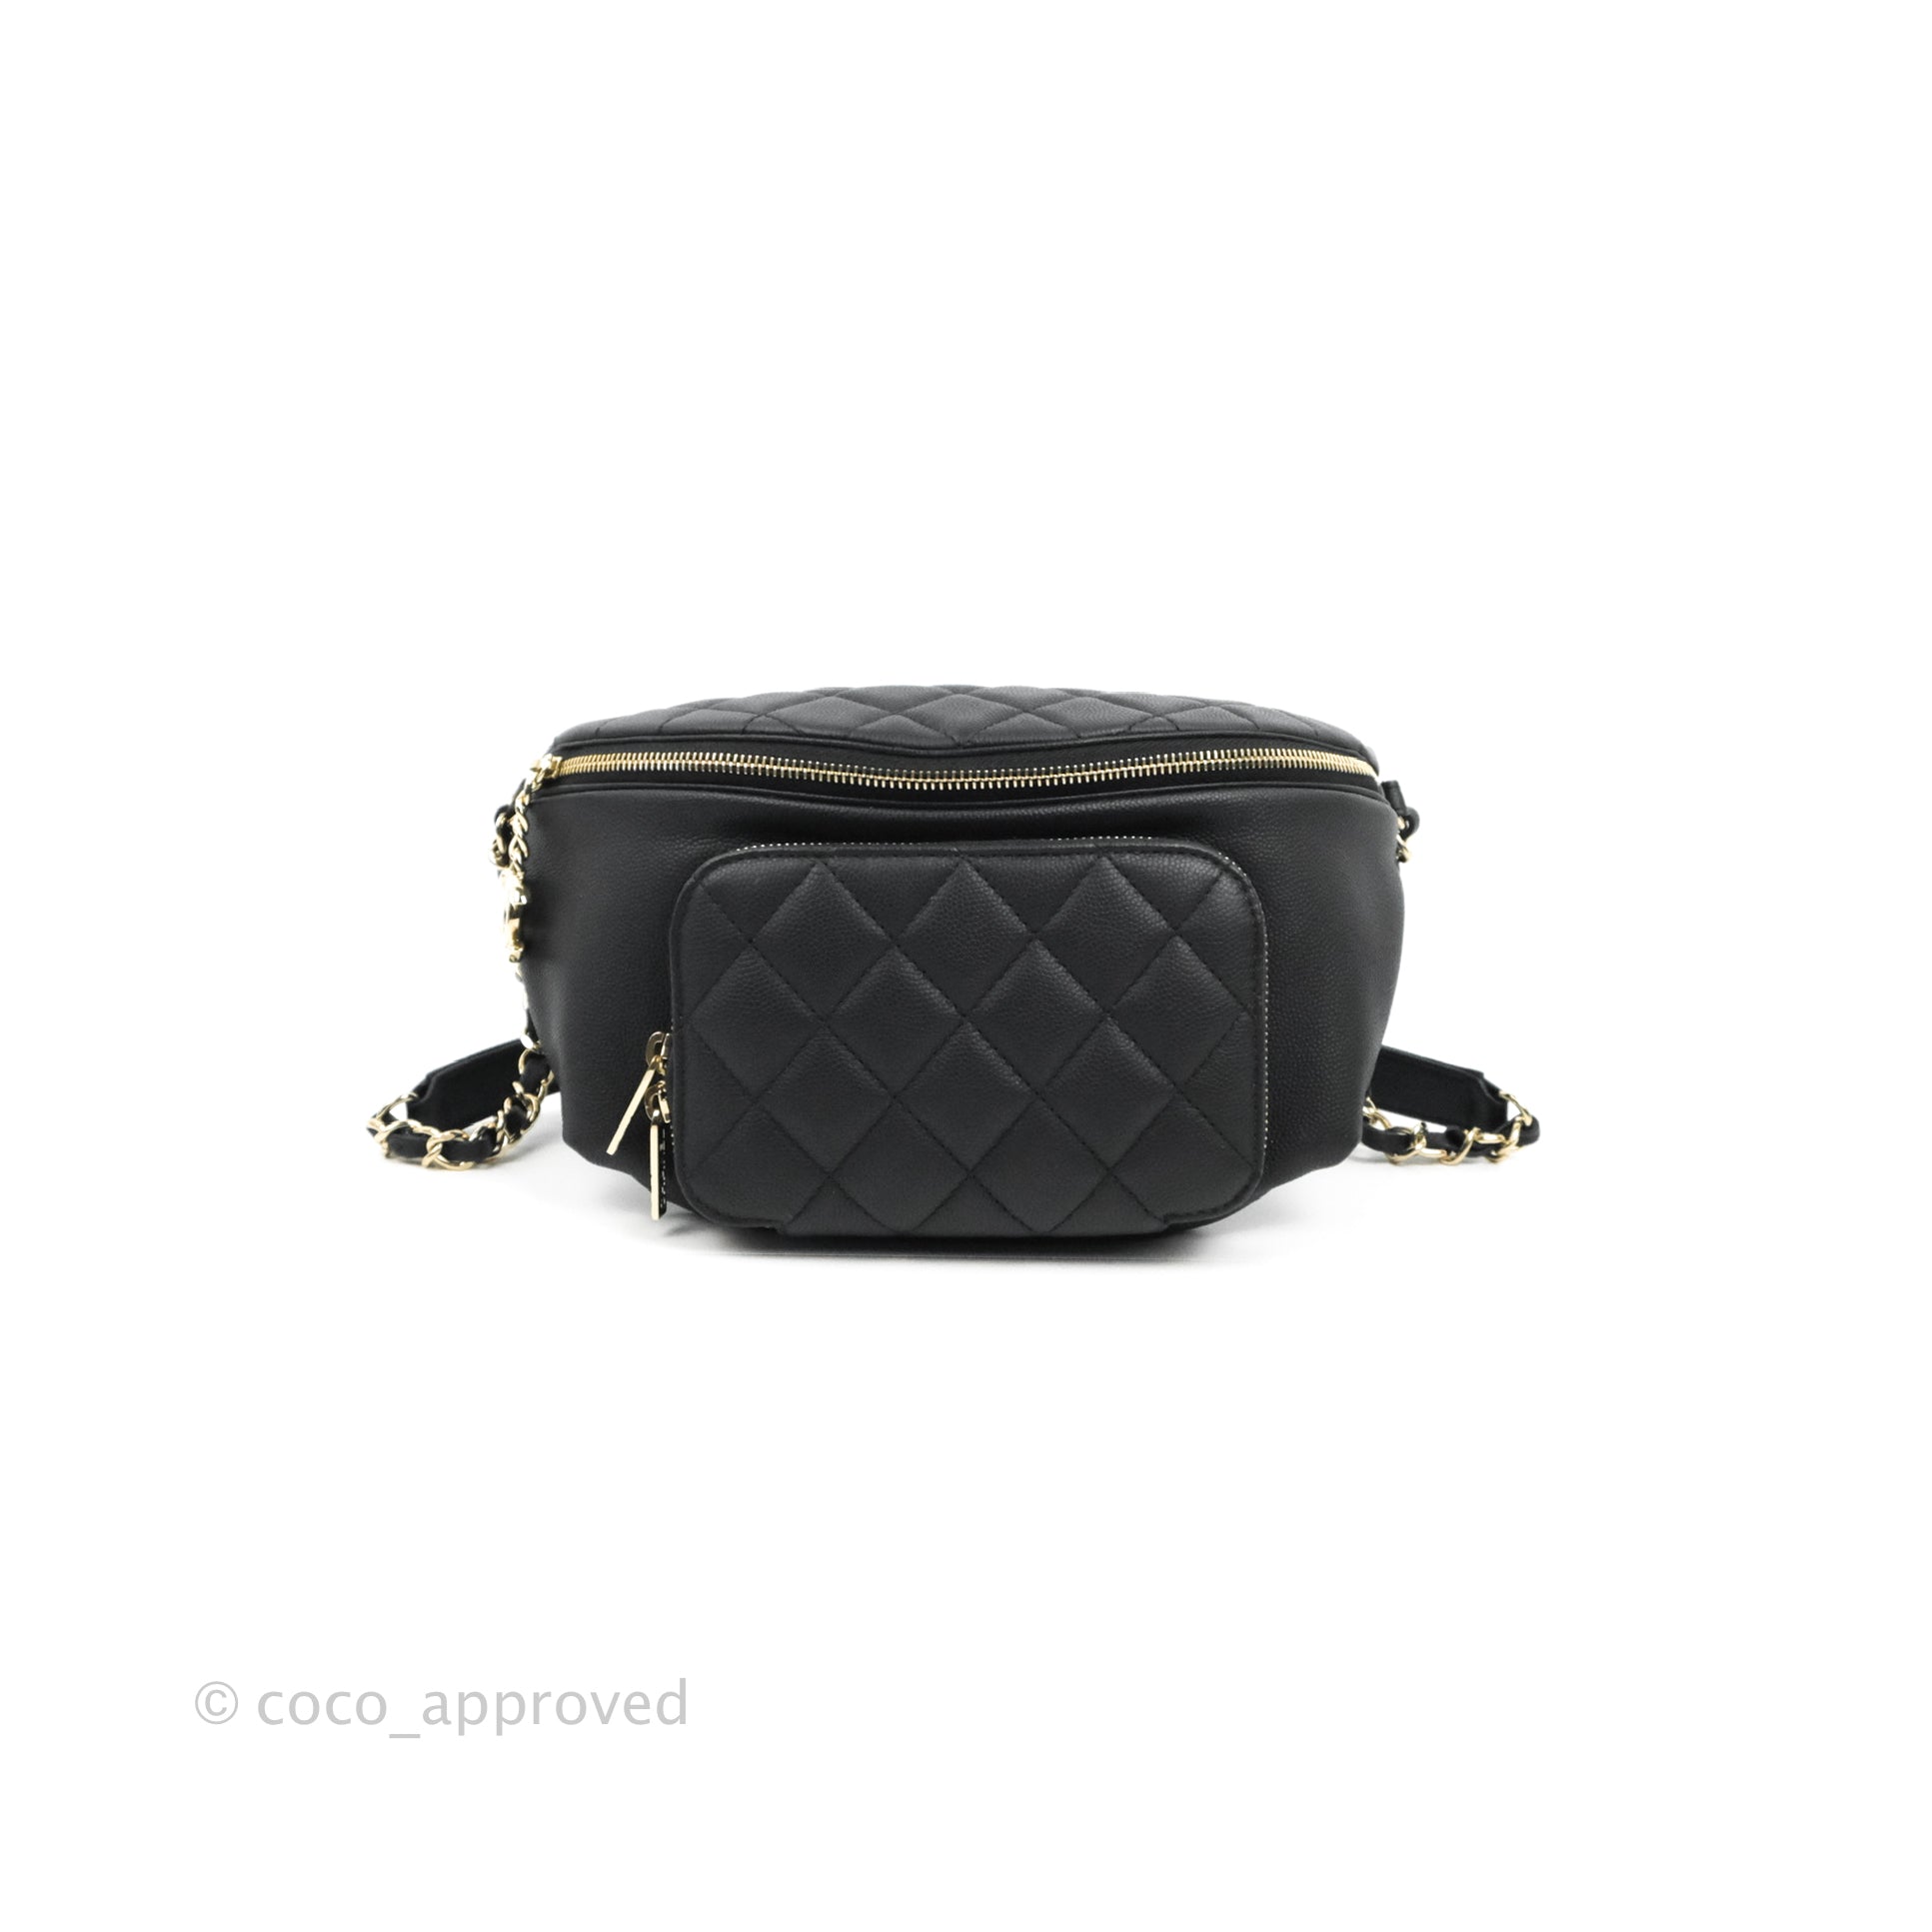 Sold at Auction Chanel Vintage White Quilted Leather Belt Bag